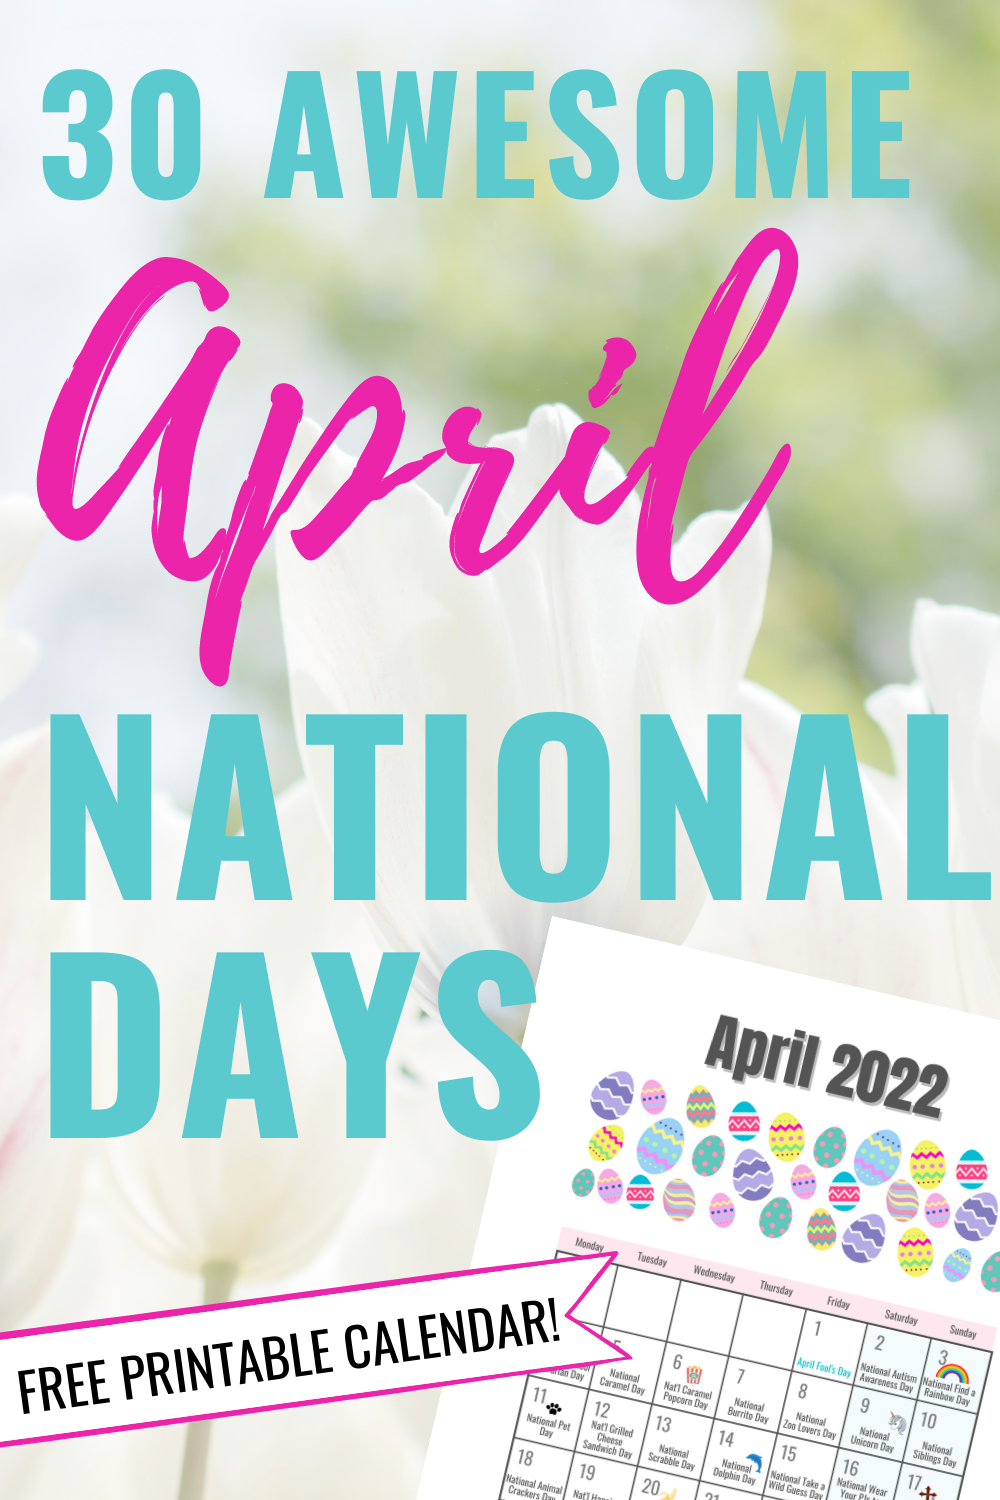 The Best April National Days to Celebrate as a Family